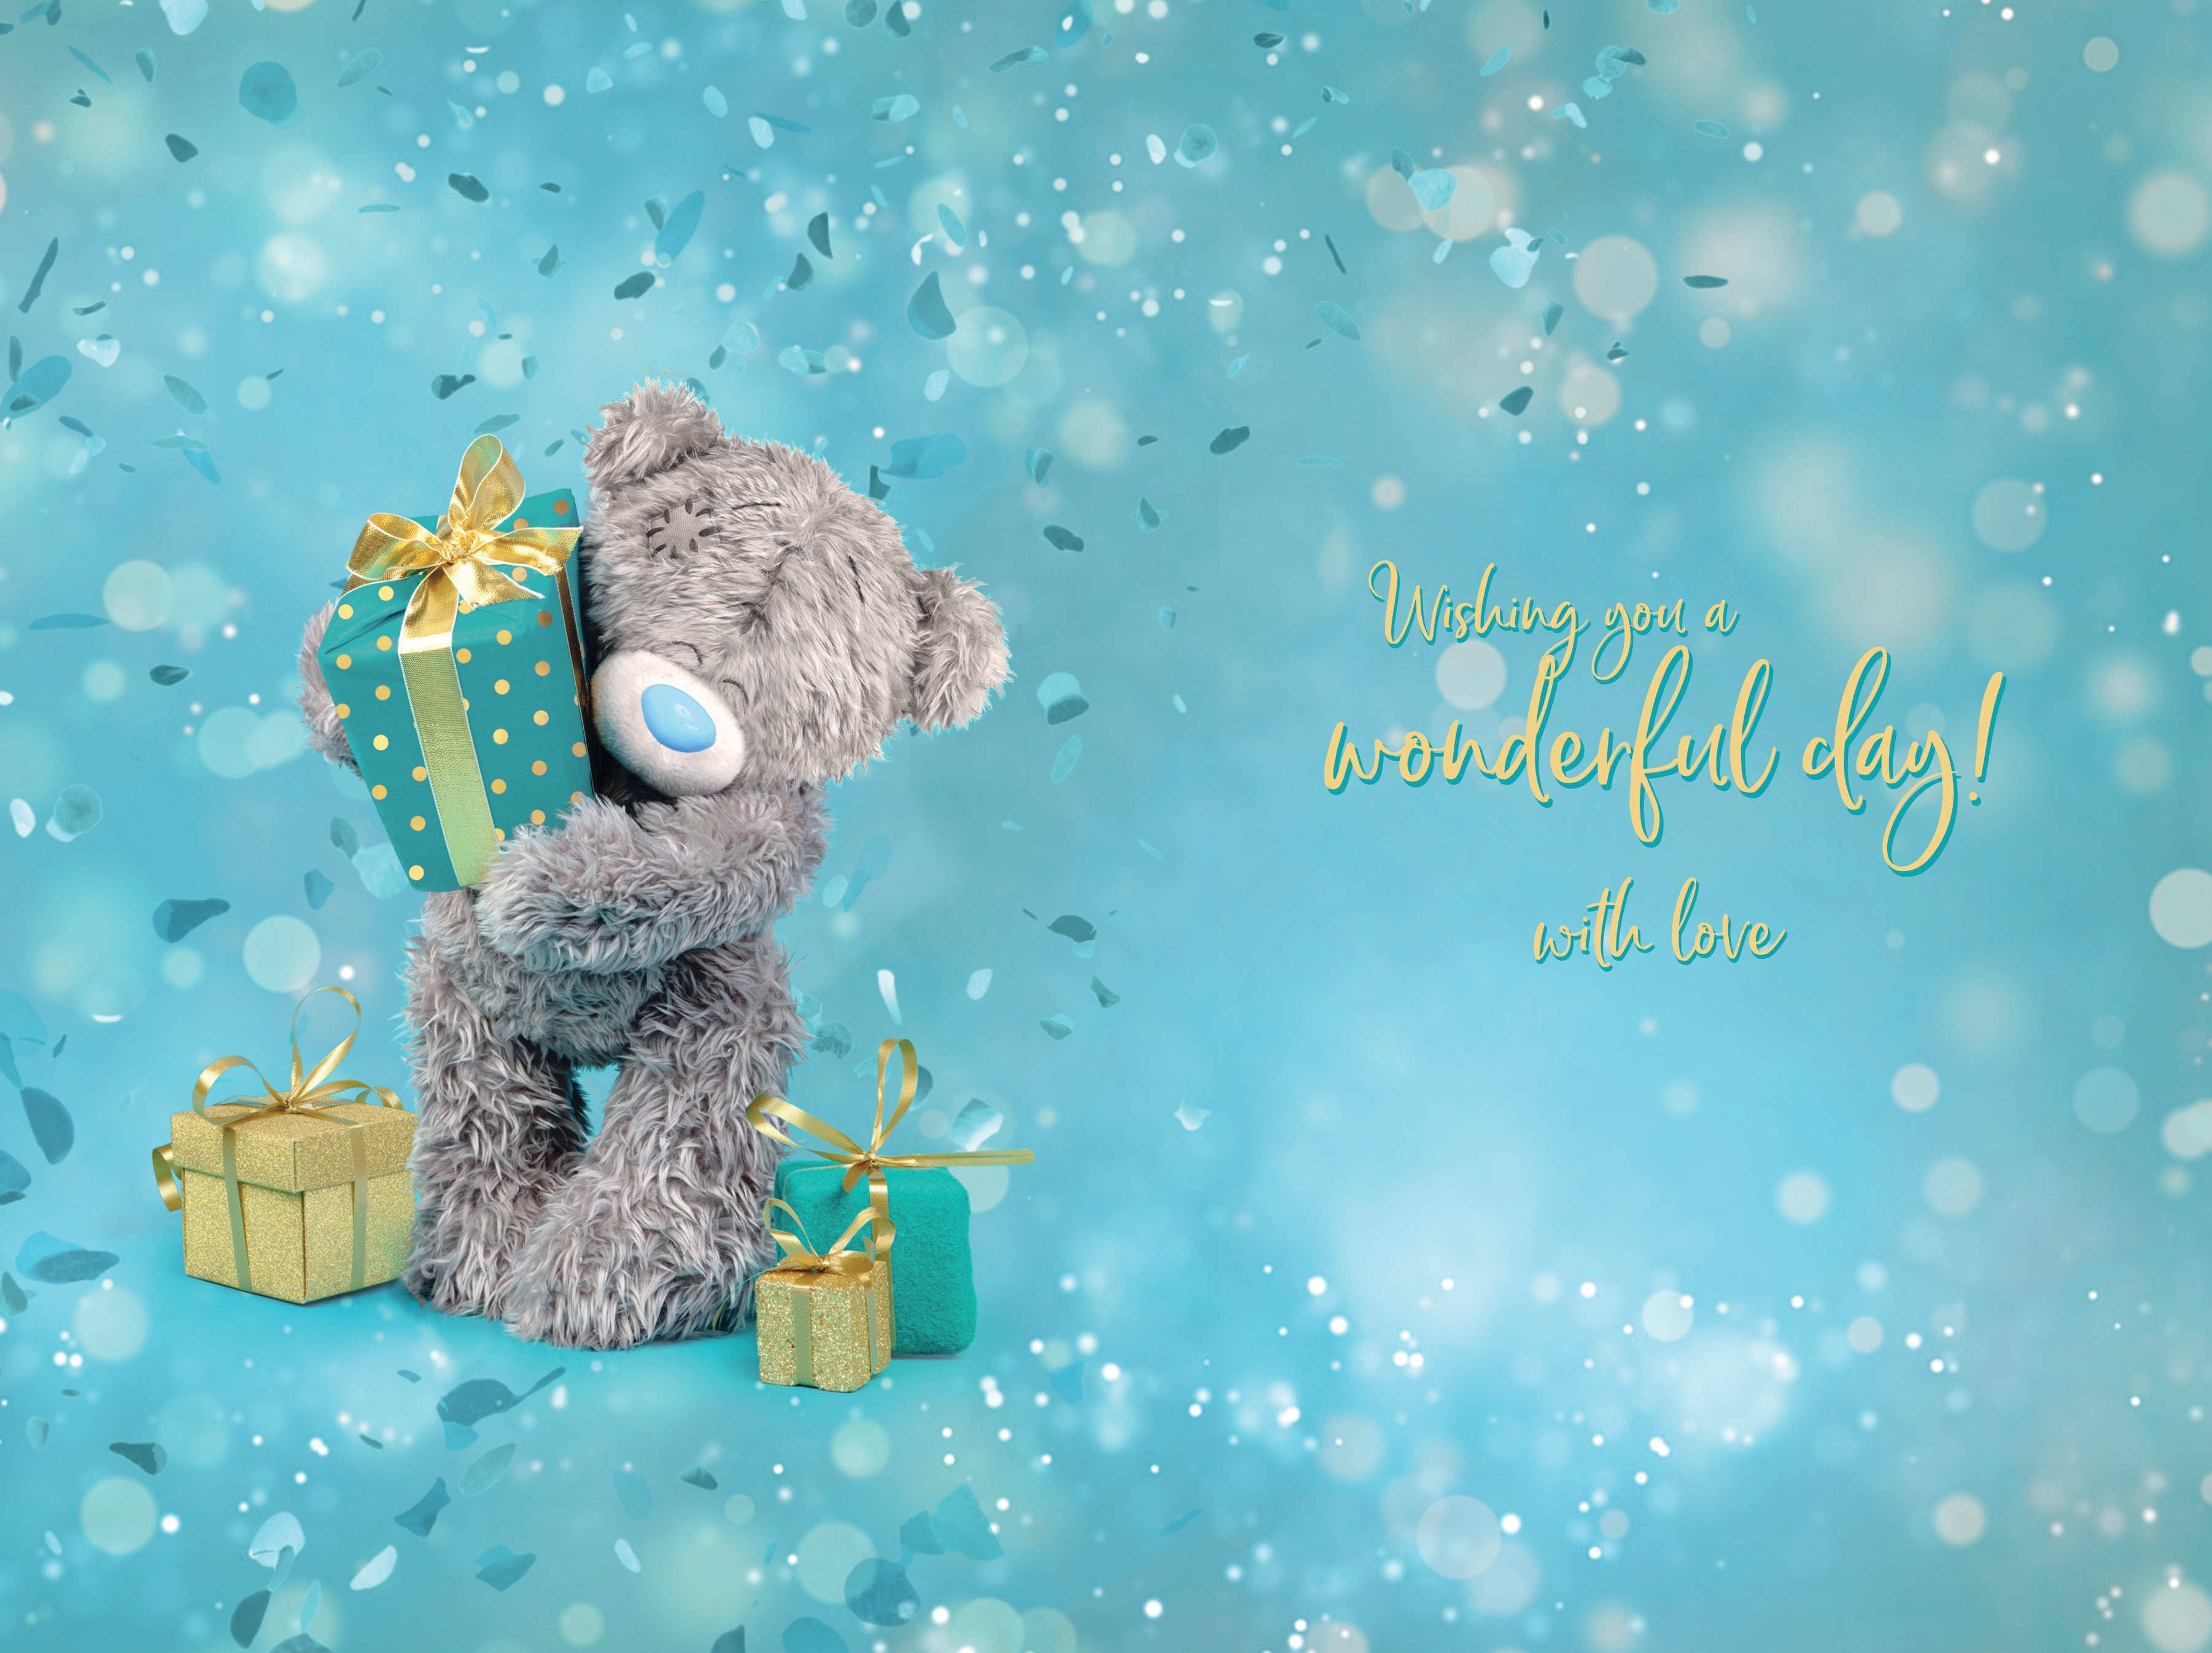 30th Bear Holding Gift Birthday Card - Me To You